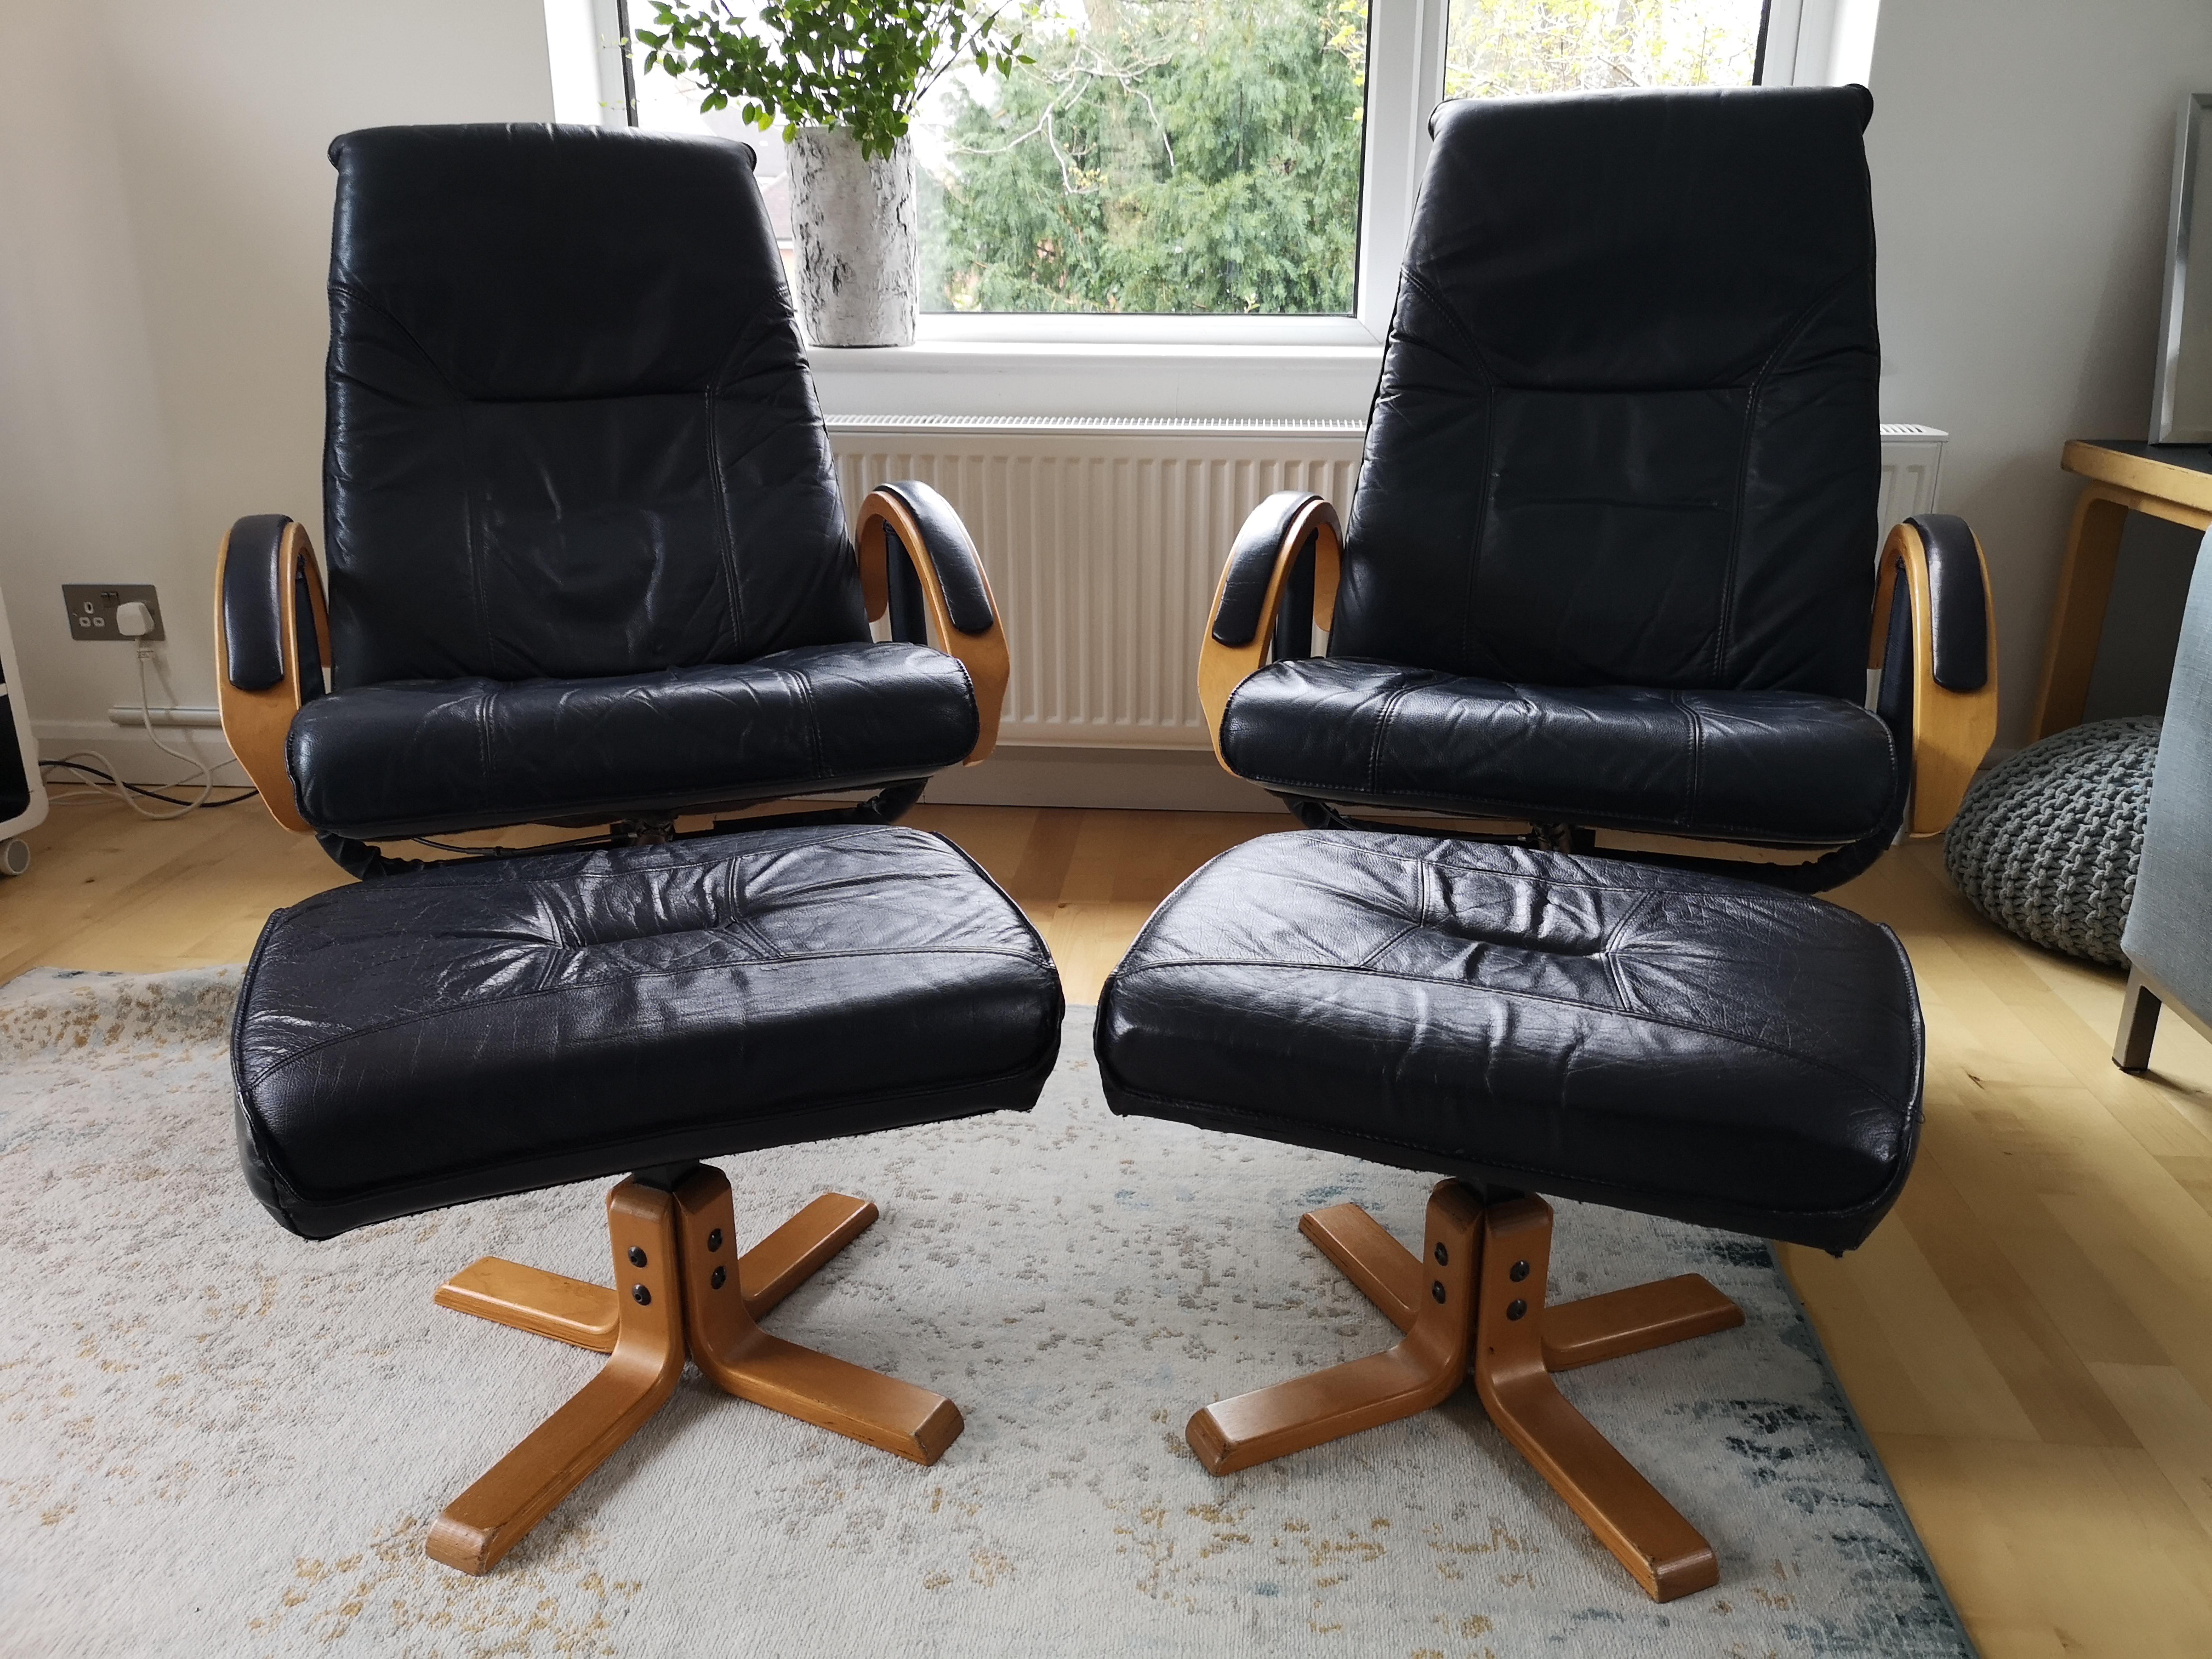 A stunning and very comfortable pair of Danish Unico 1970s midcentury reclining leather armchairs with ottomans attributed to Jørgen Kastholm. Some minor signs of use as expected, but the black leather is in fantastic condition with no rips or